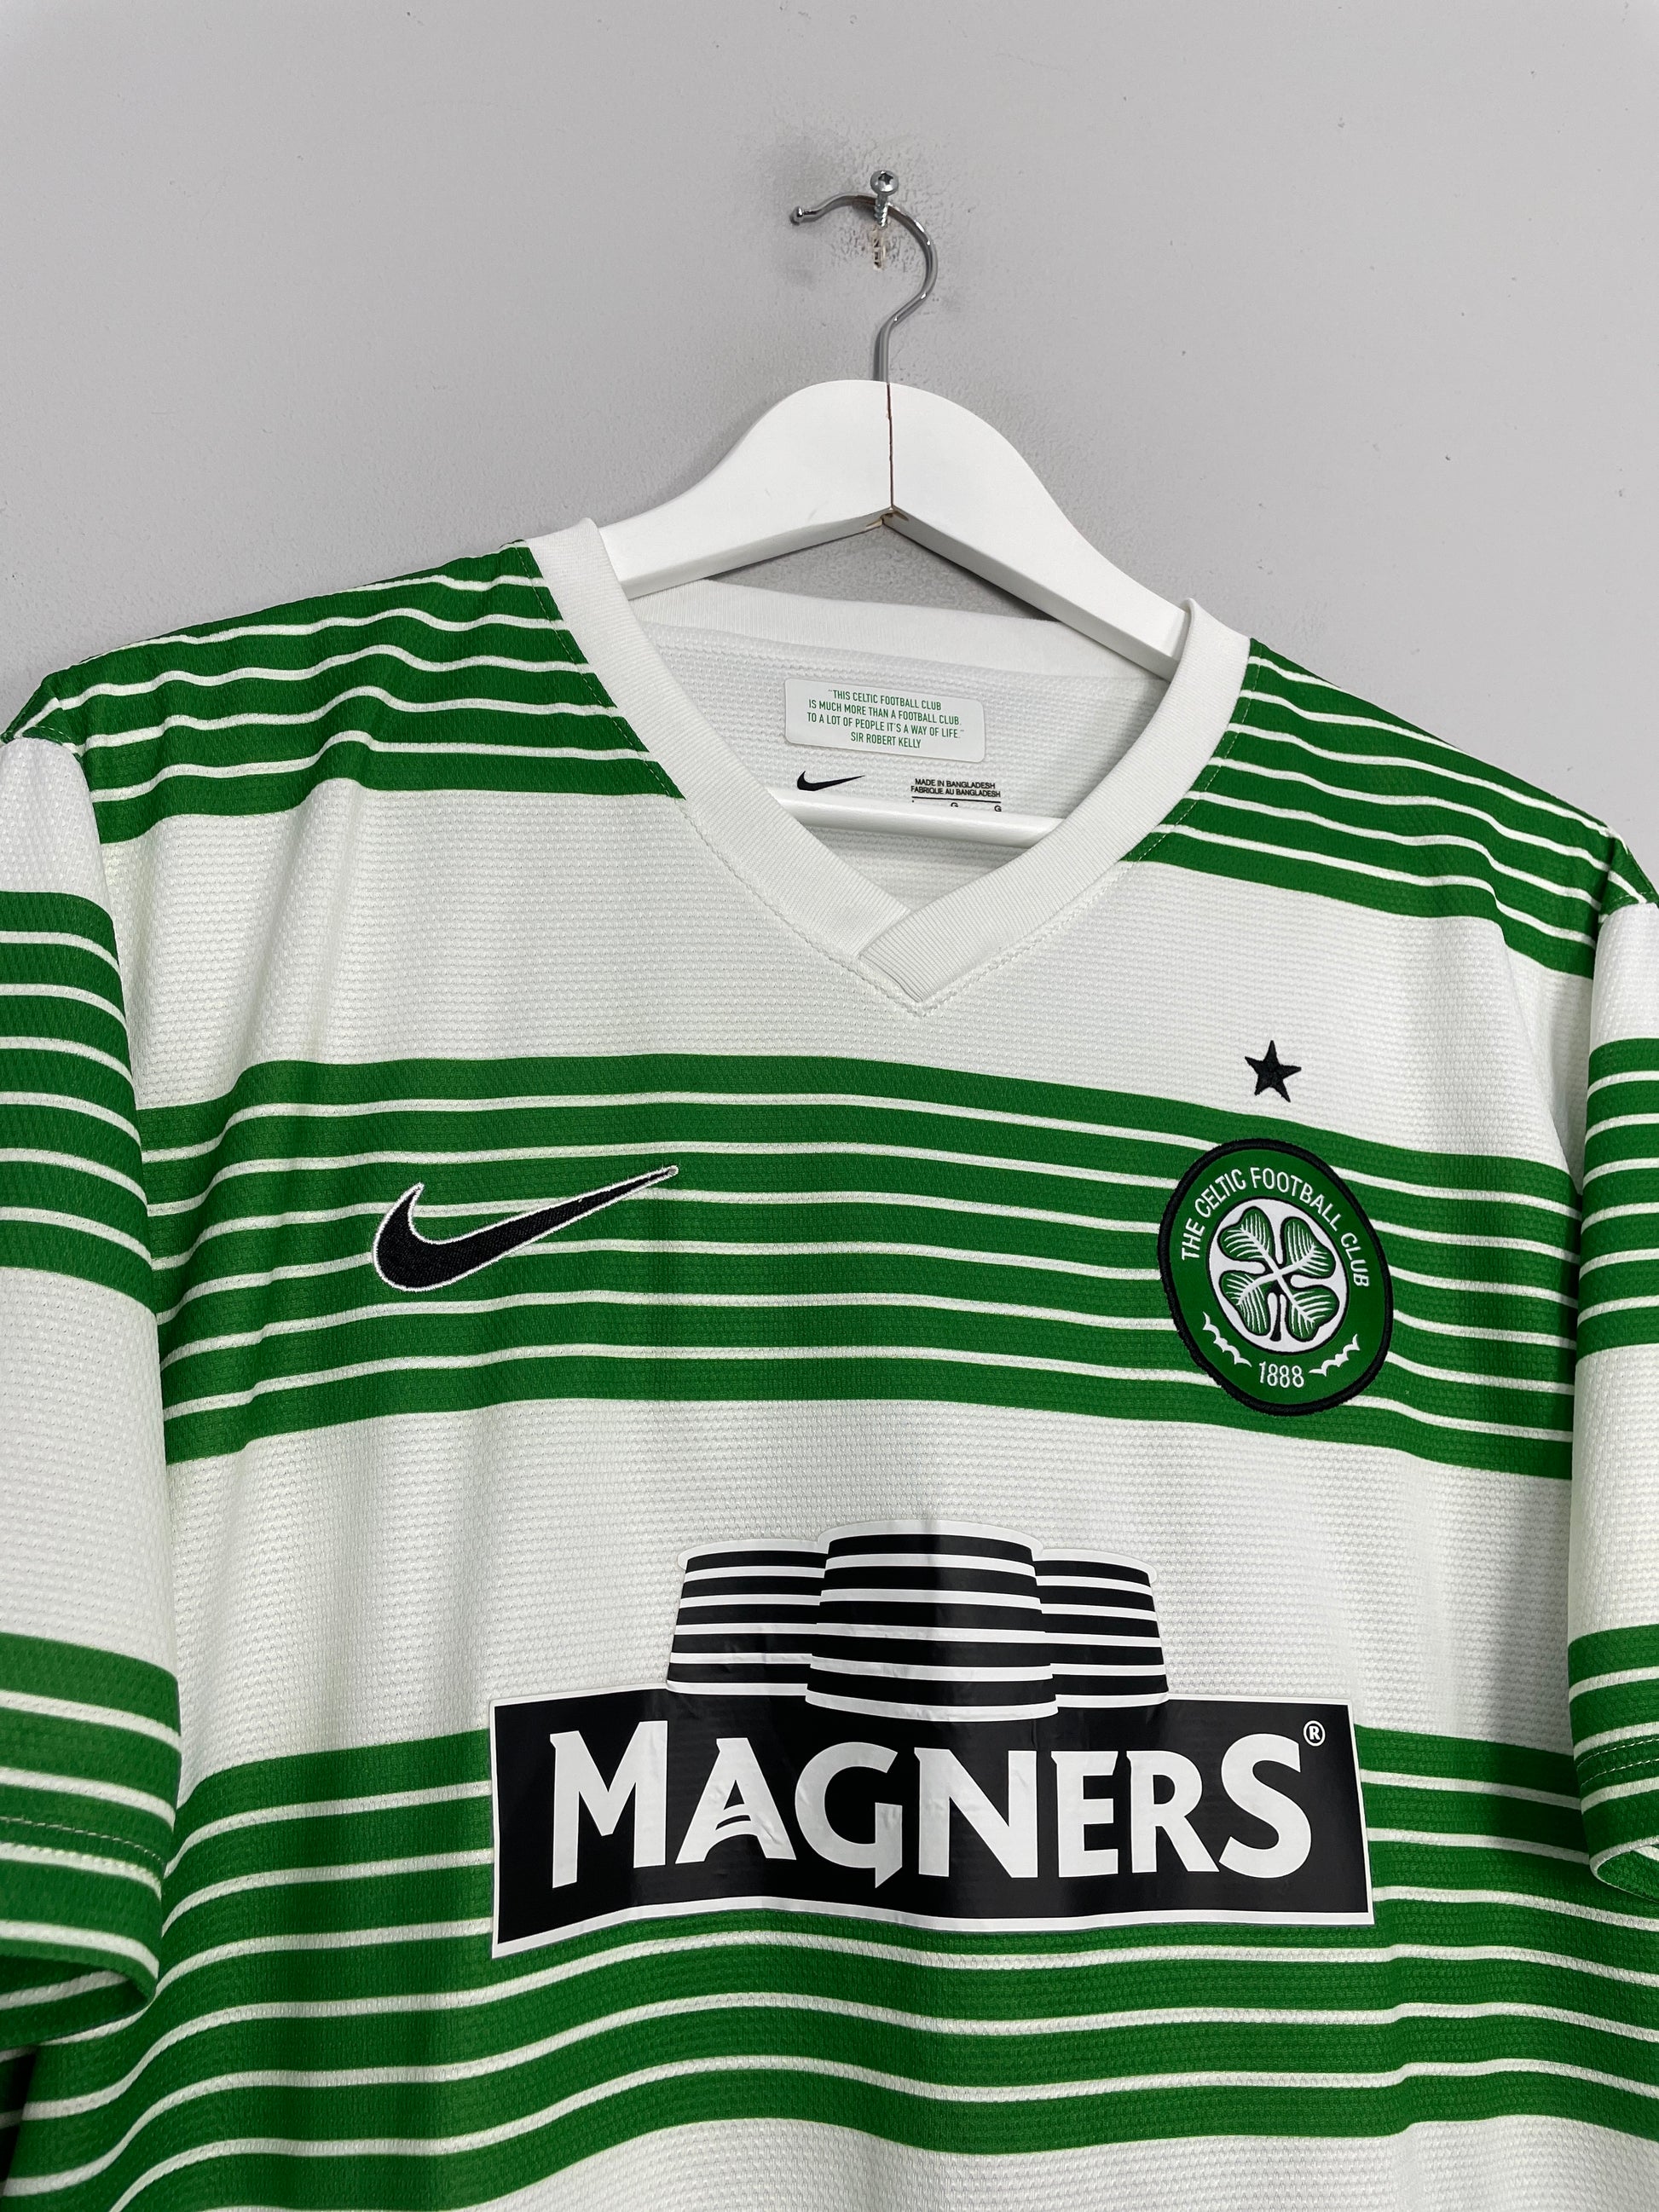 New Nike Celtic 14-15 Away and Third Kits